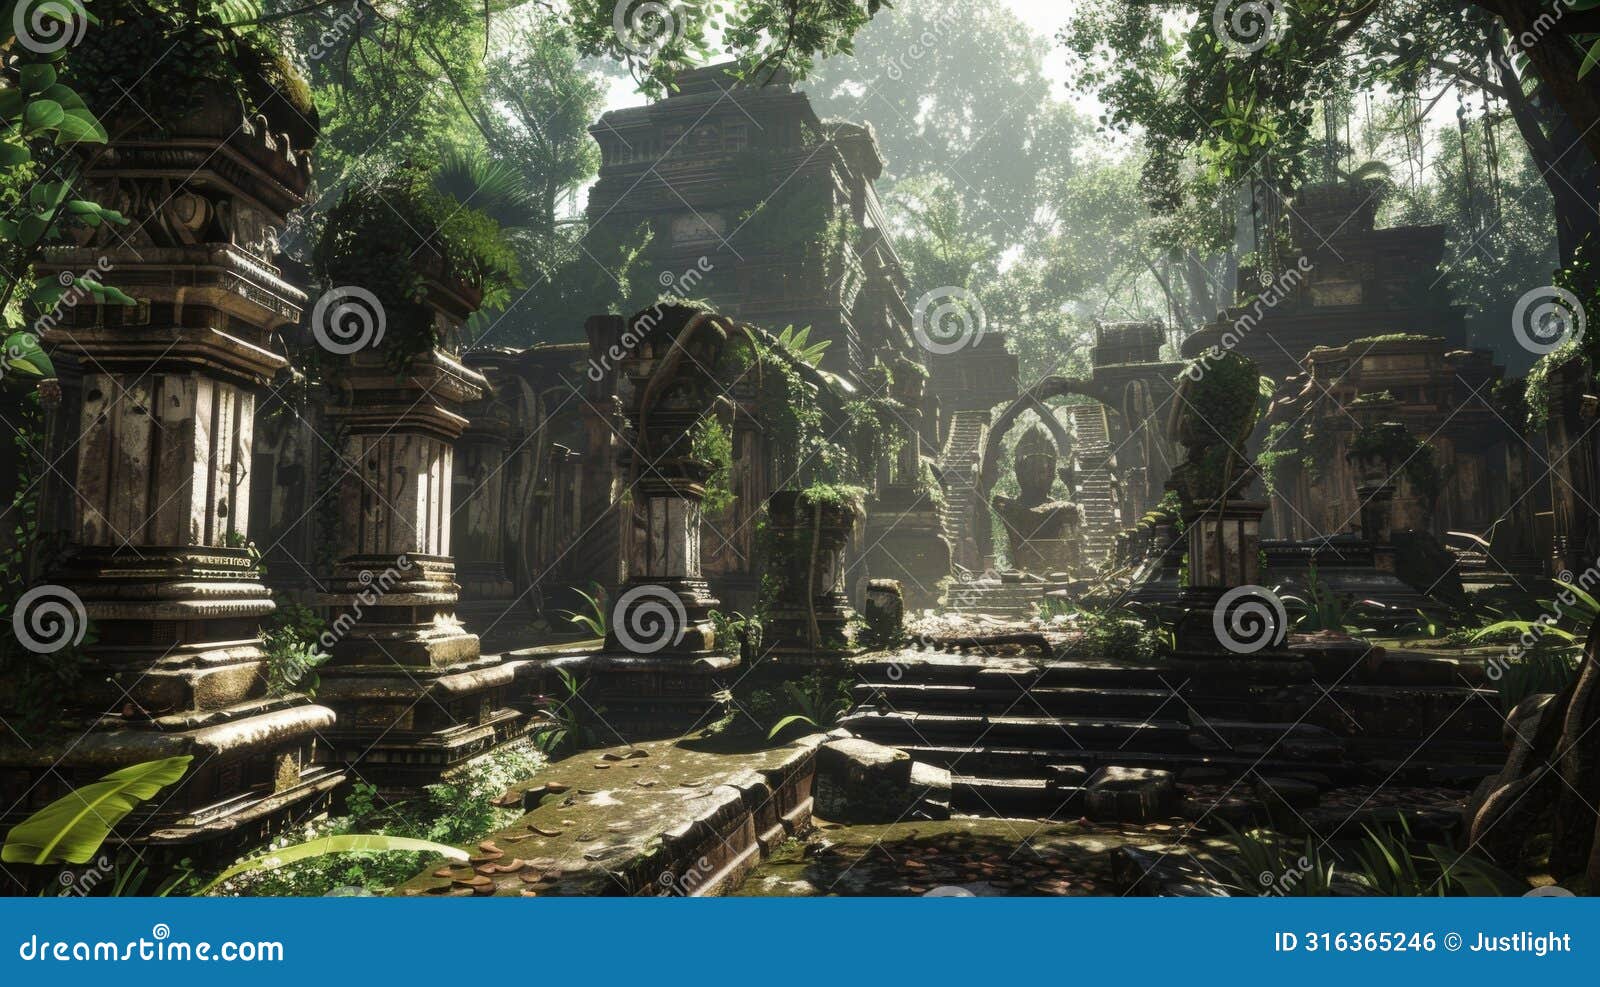 deep within a dense forest a hidden city lies untouched by the outside world for centuries. its buildings are a mix of